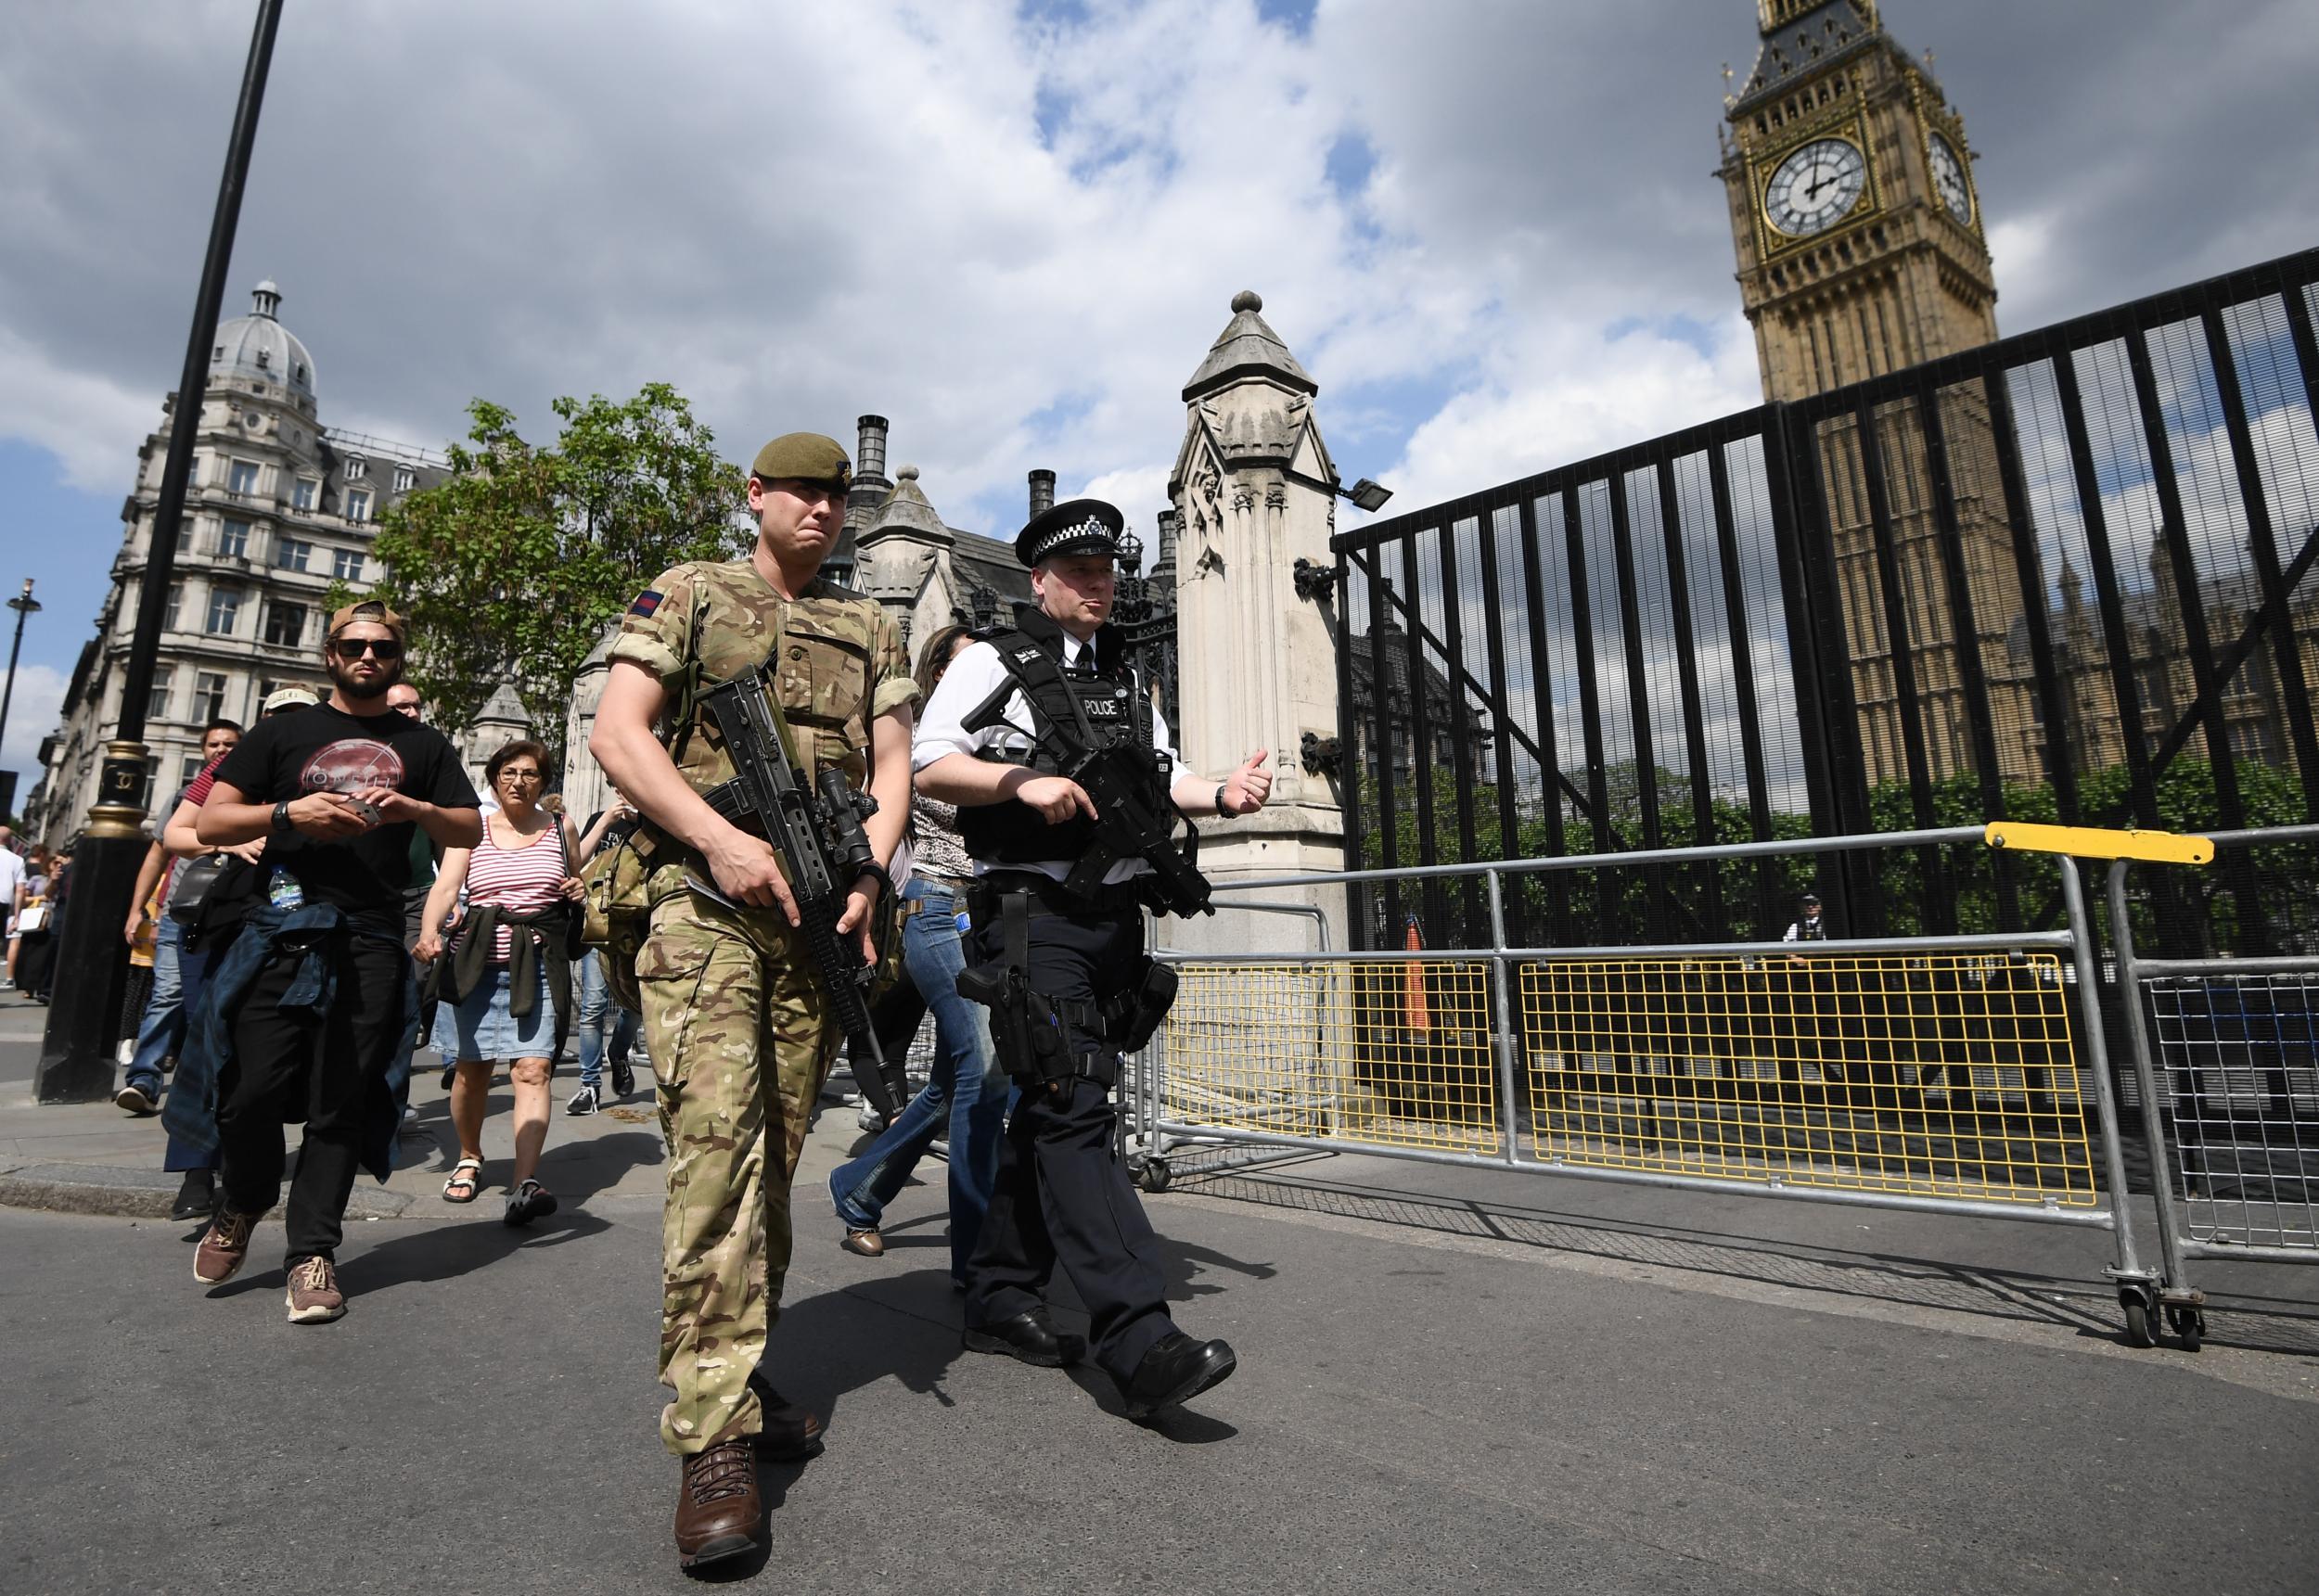 Security has been stepped up across the UK since the Manchester attack earlier this week